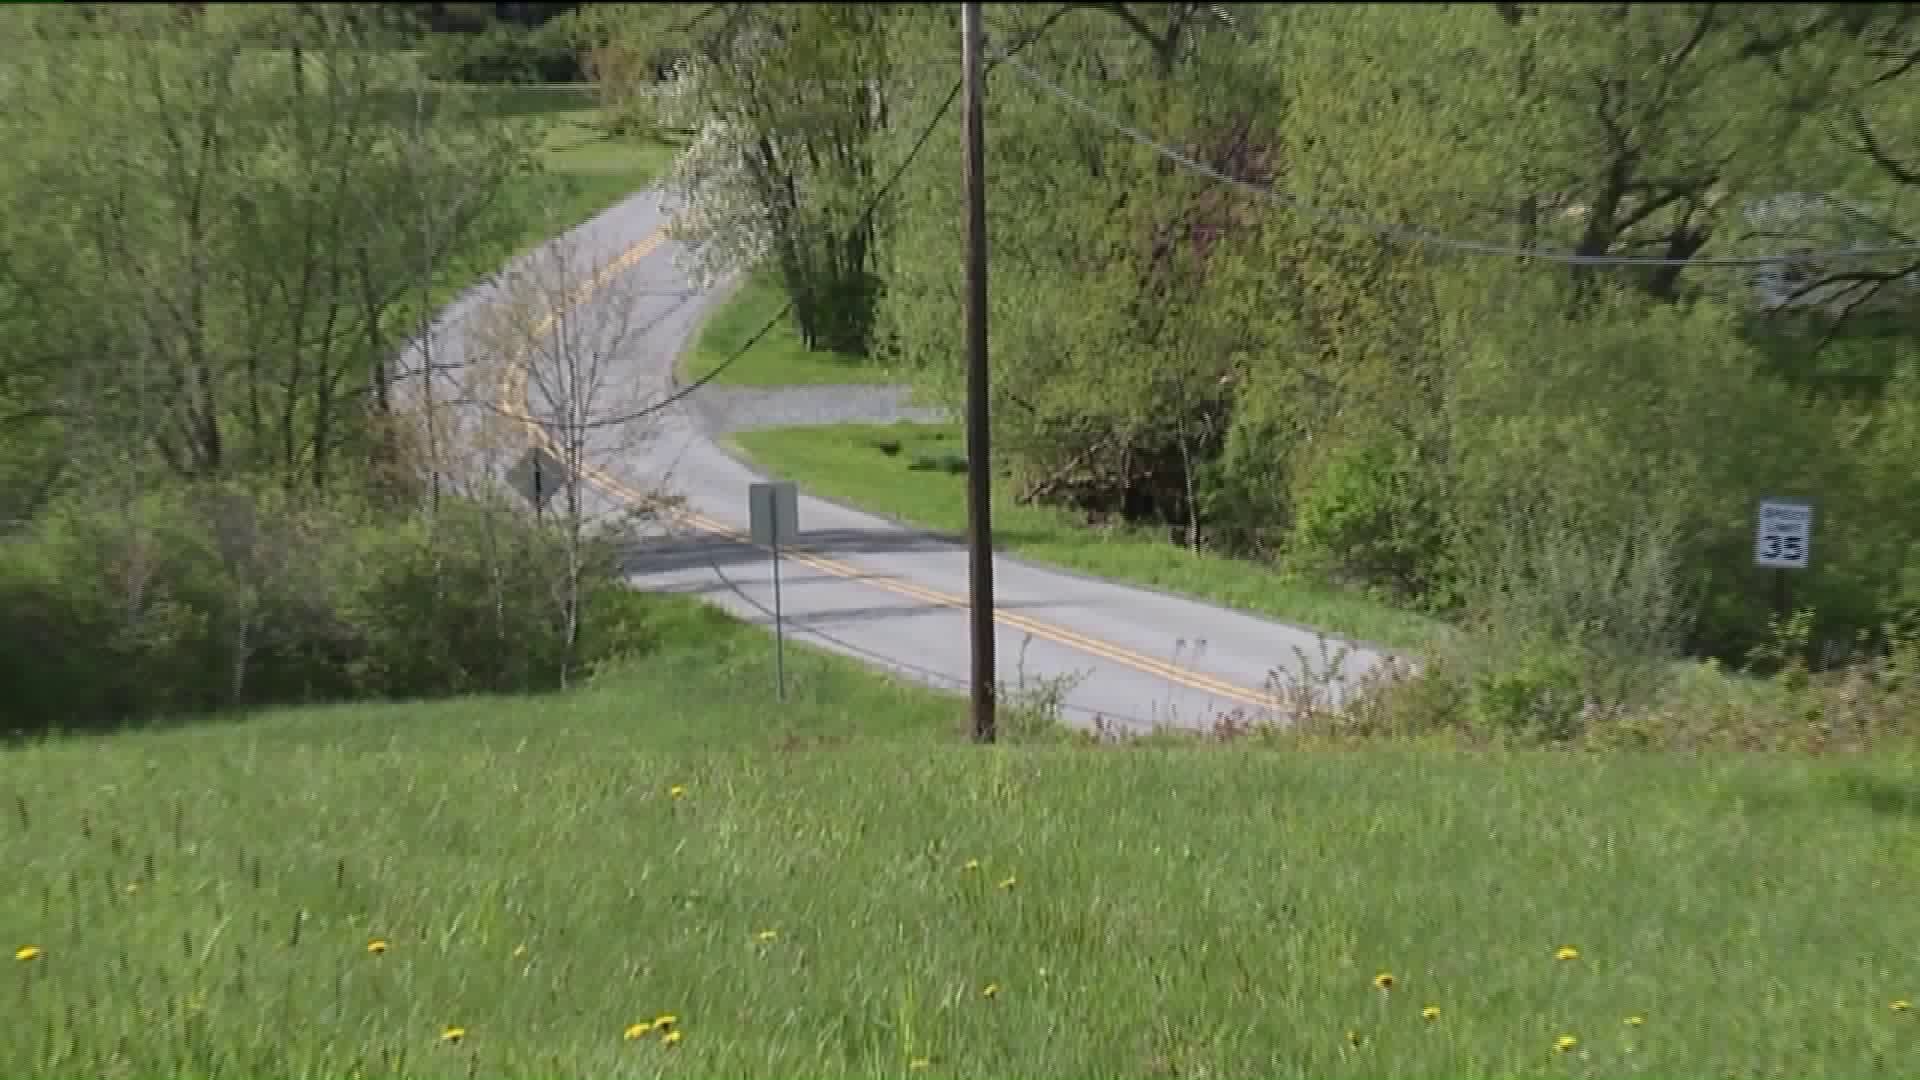 Human Remains Discovered in Susquehanna County